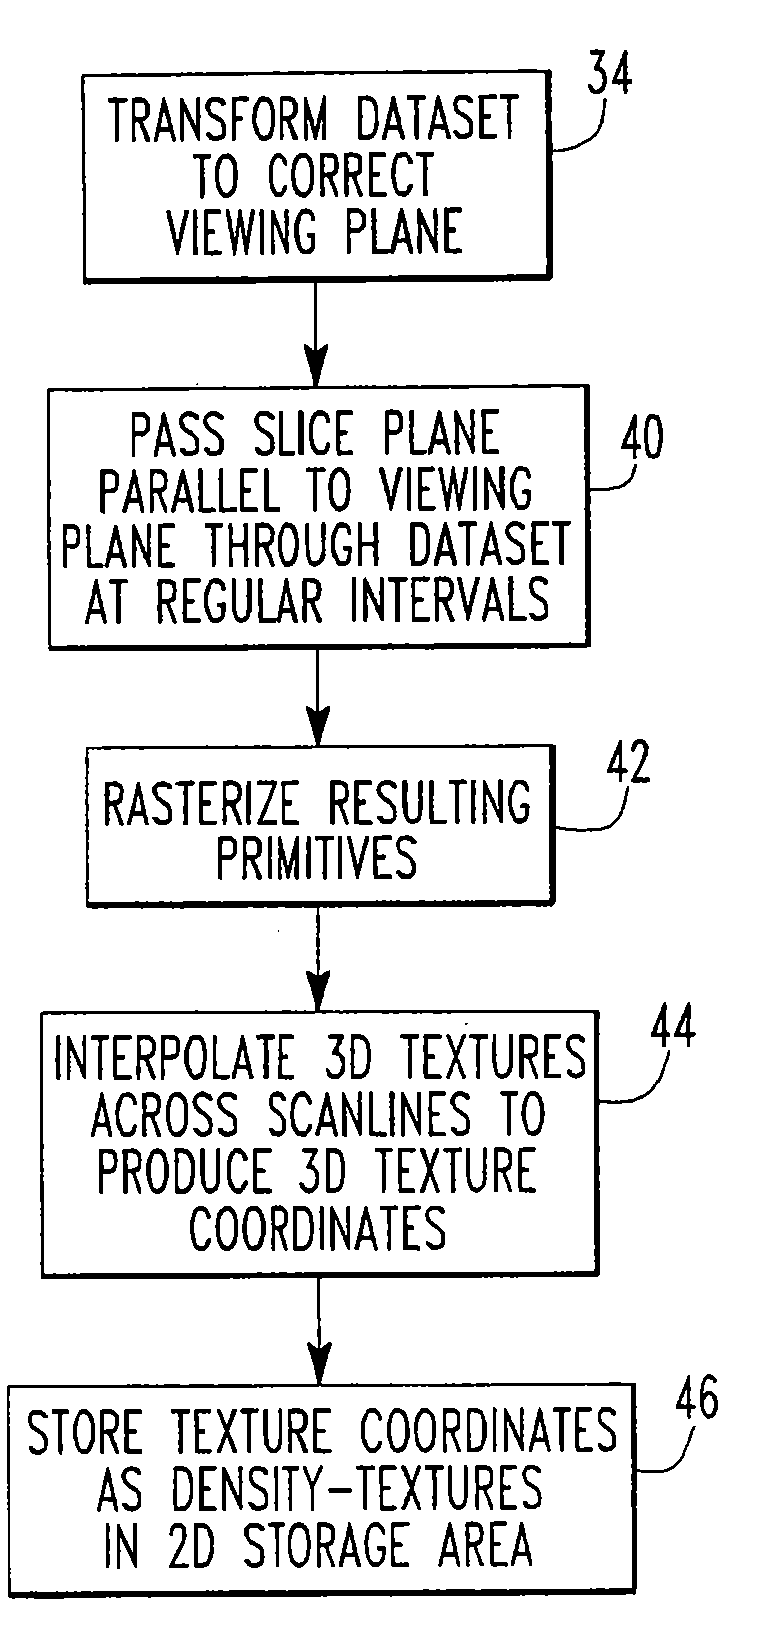 Architecture for real-time texture look-up's for volume rendering